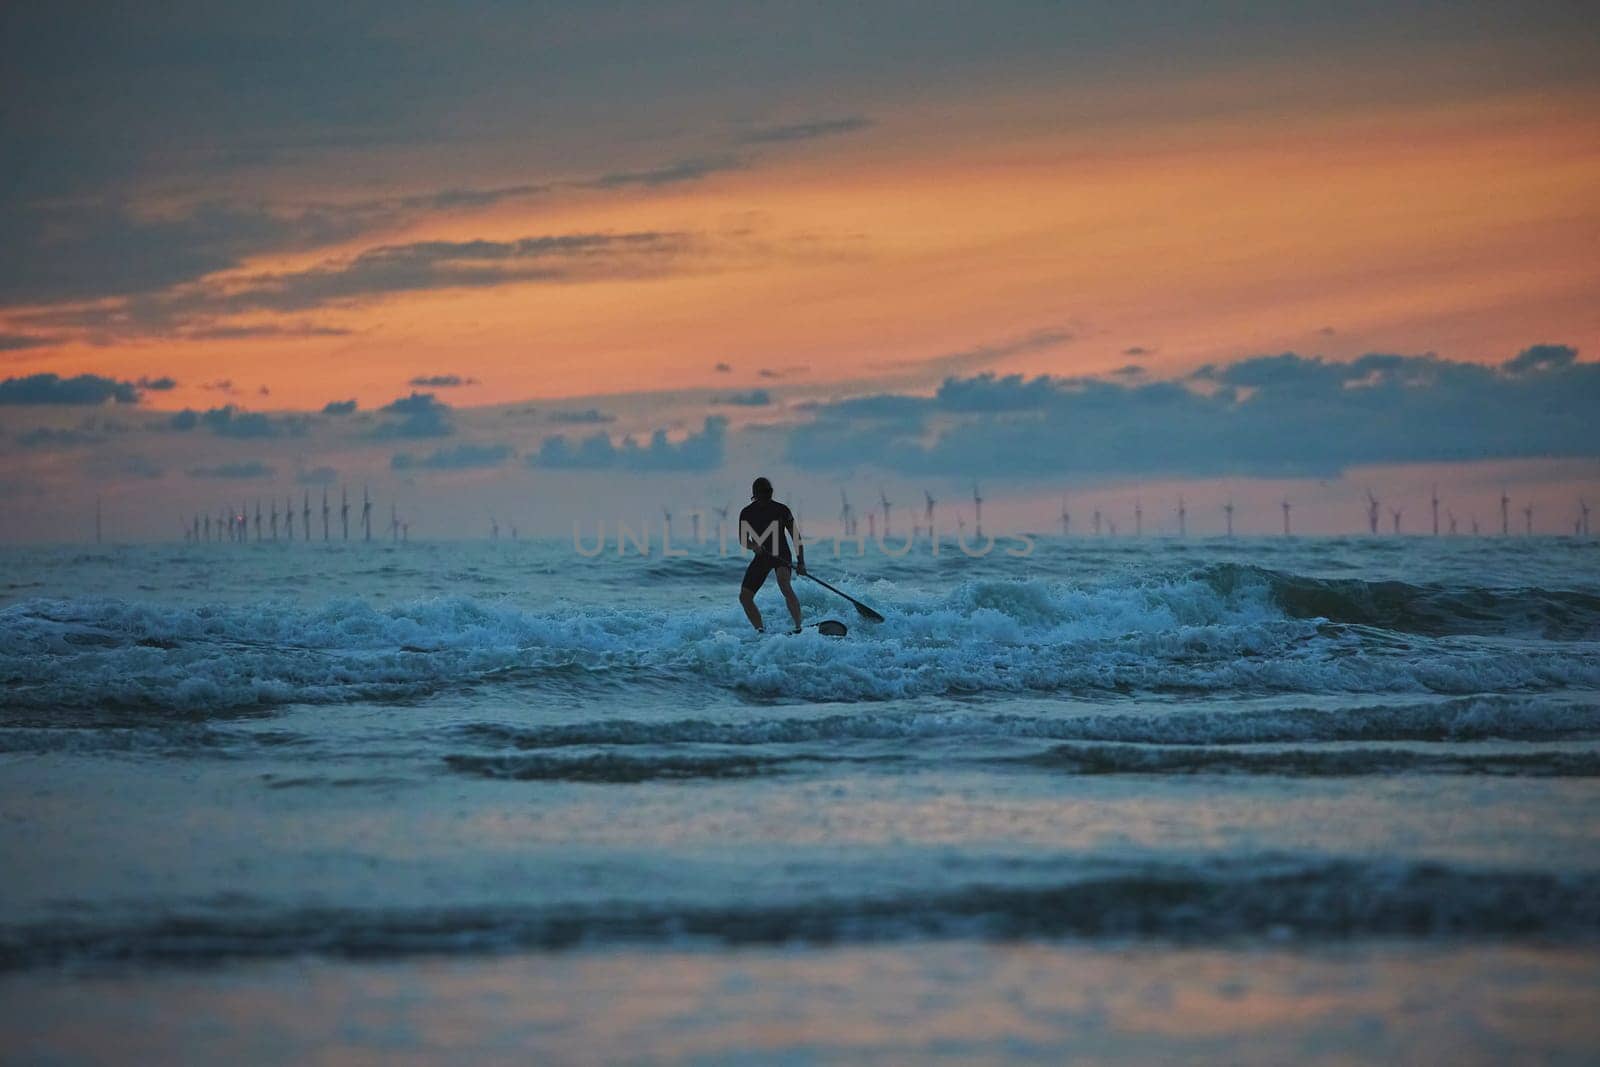 Surfer in the North Sea in the Netherlands at night by Viktor_Osypenko